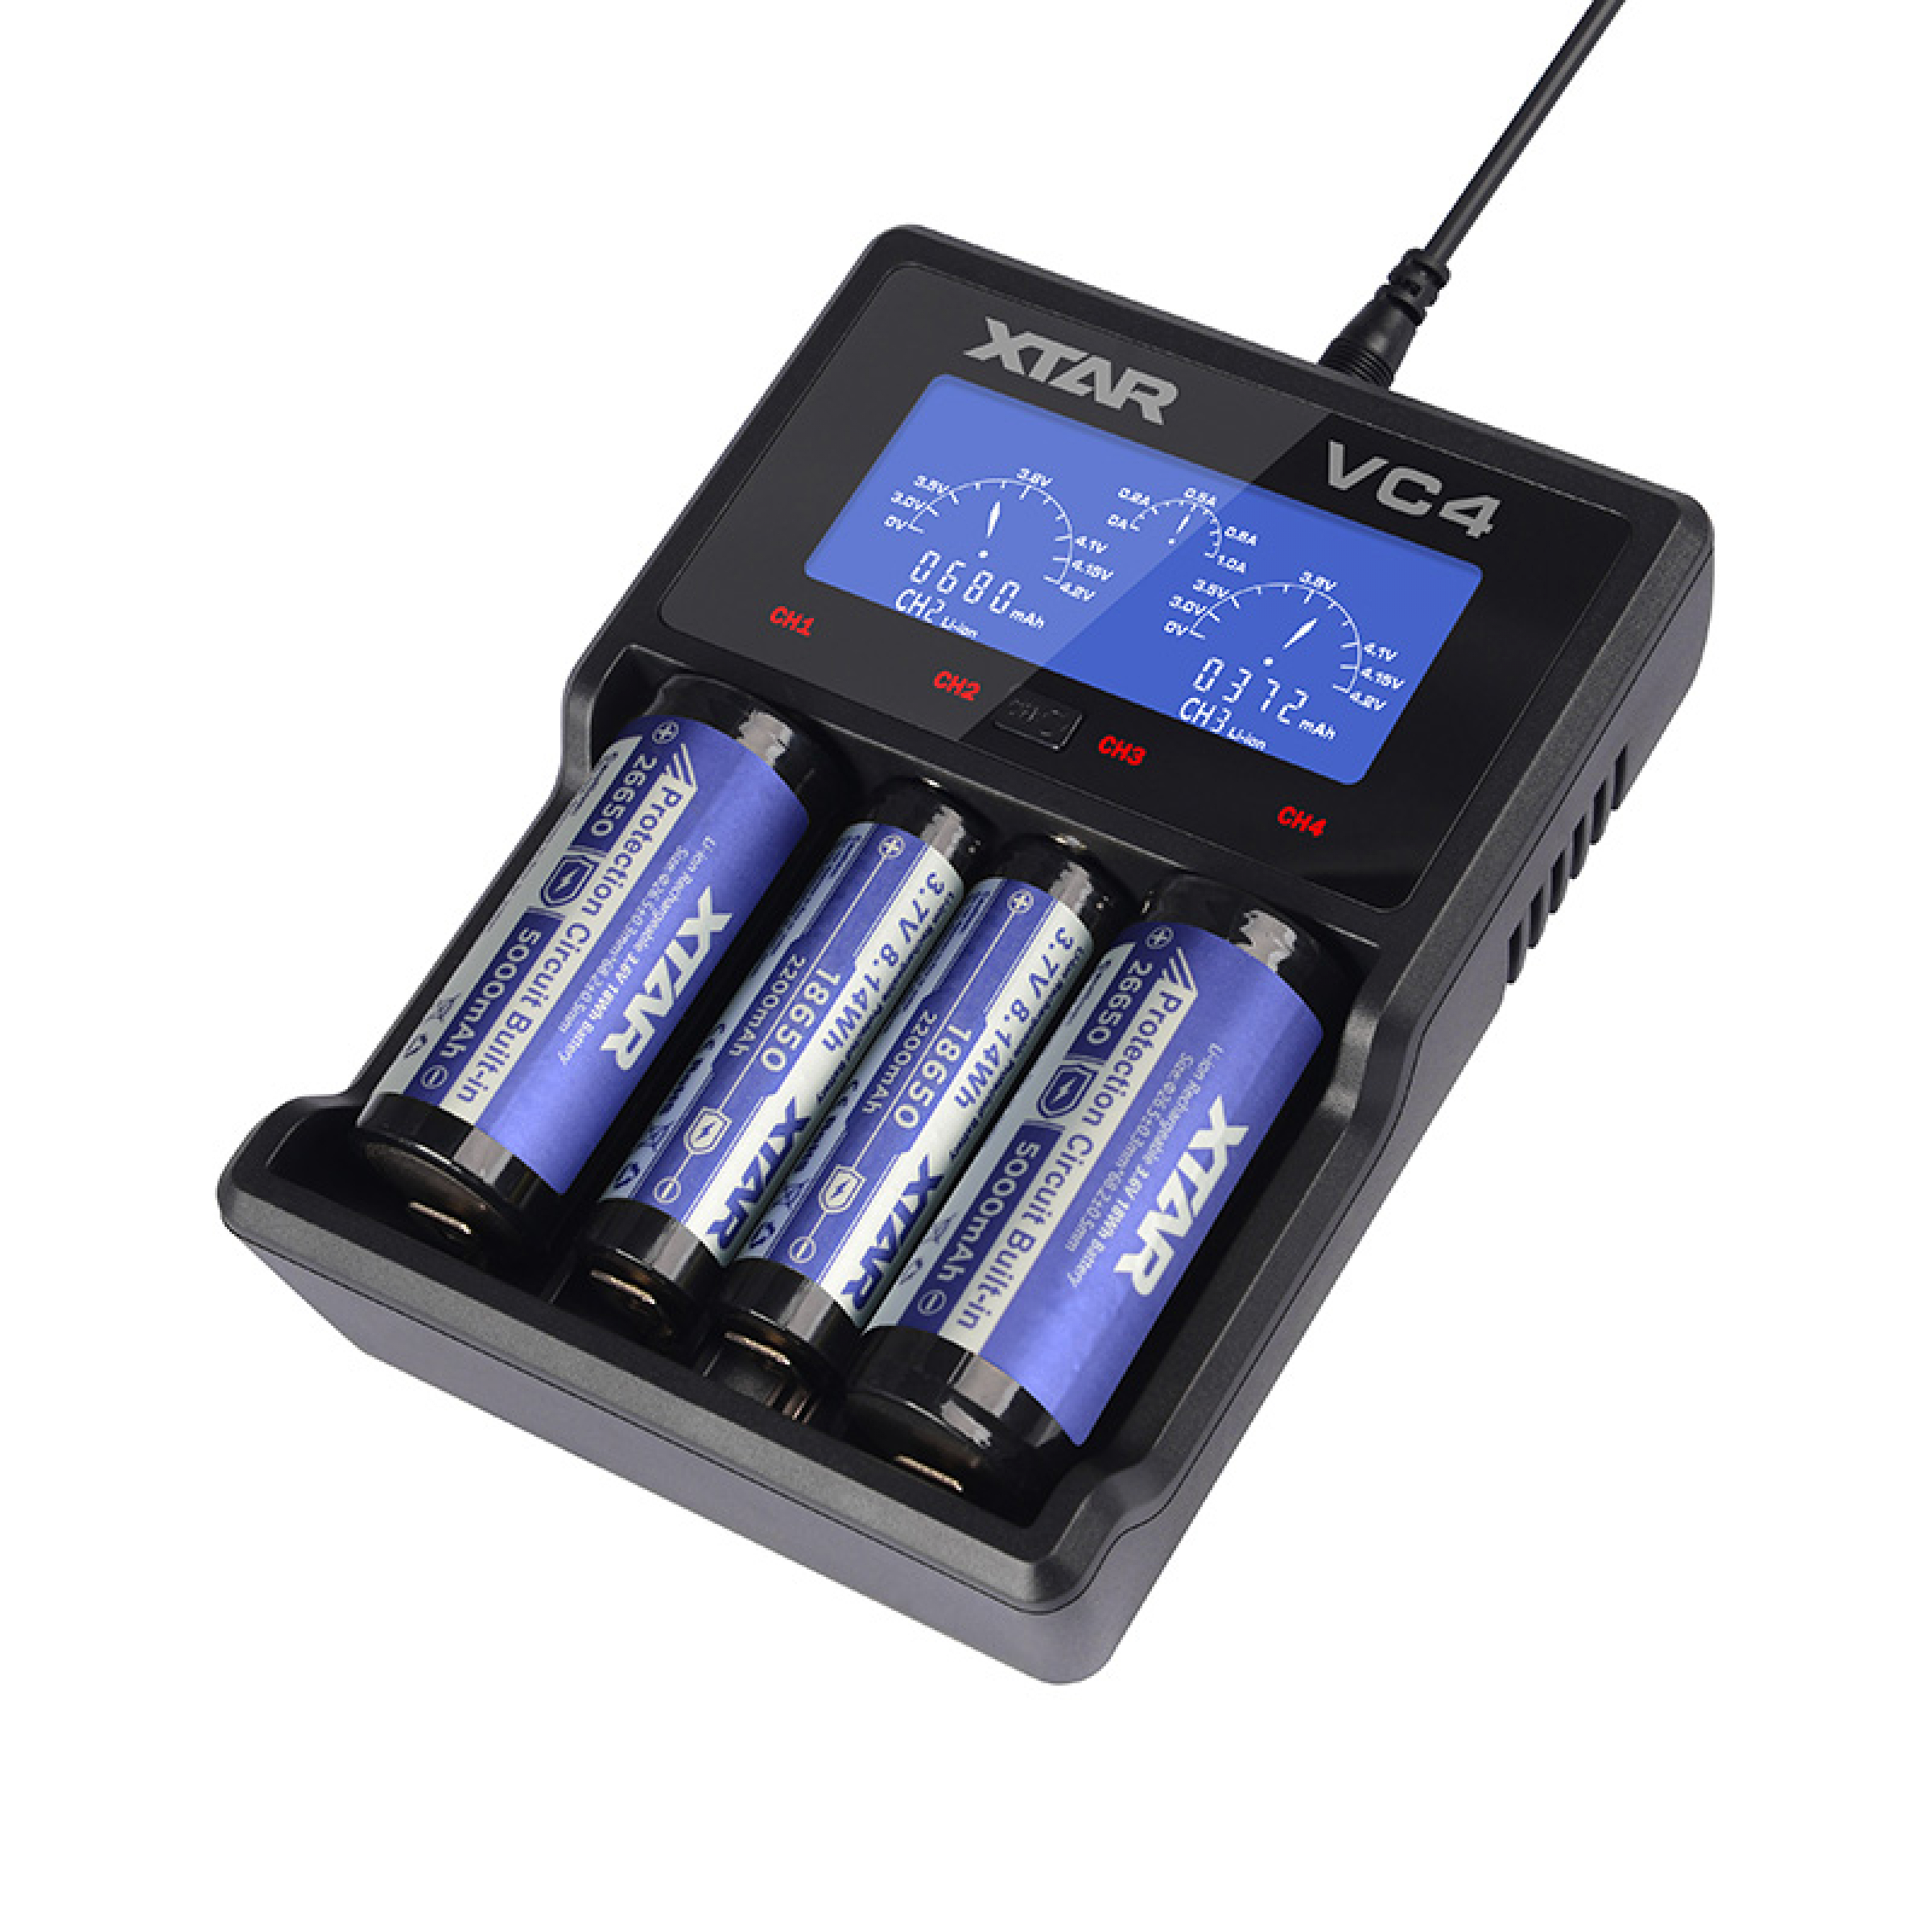 XTAR Charger VC4 charger for4 x Li-Ion & Ni-MH Rechargeables